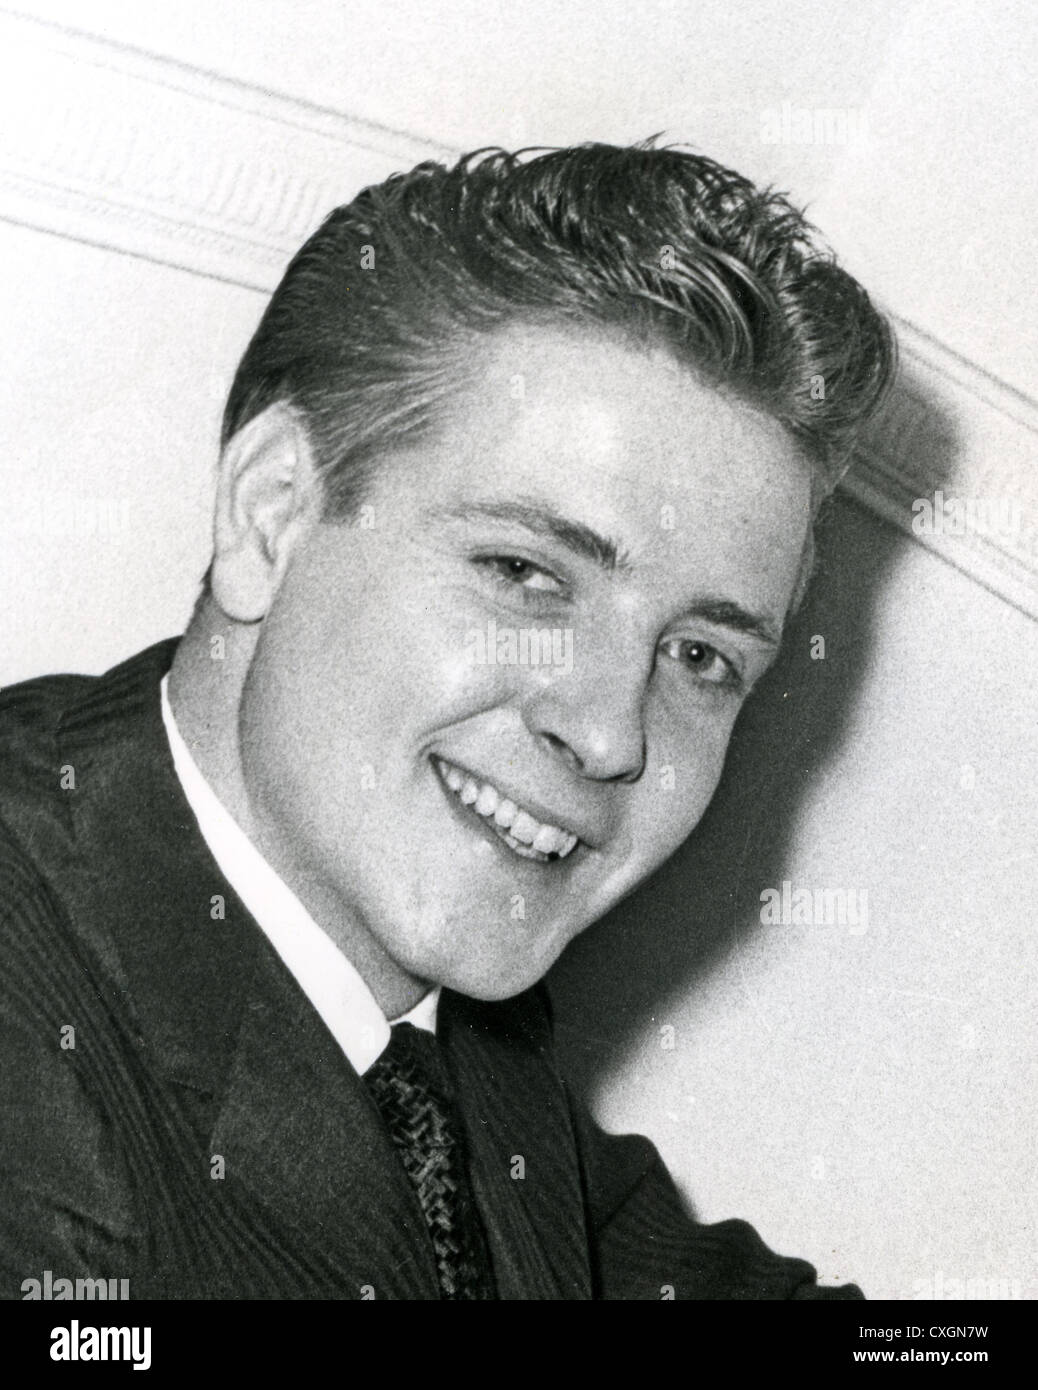 EDDIE COCHRAN (1938-1960) US rock musician photographed by Harry Hammond on Friday 15 April 1960 - he day before he died. Stock Photo